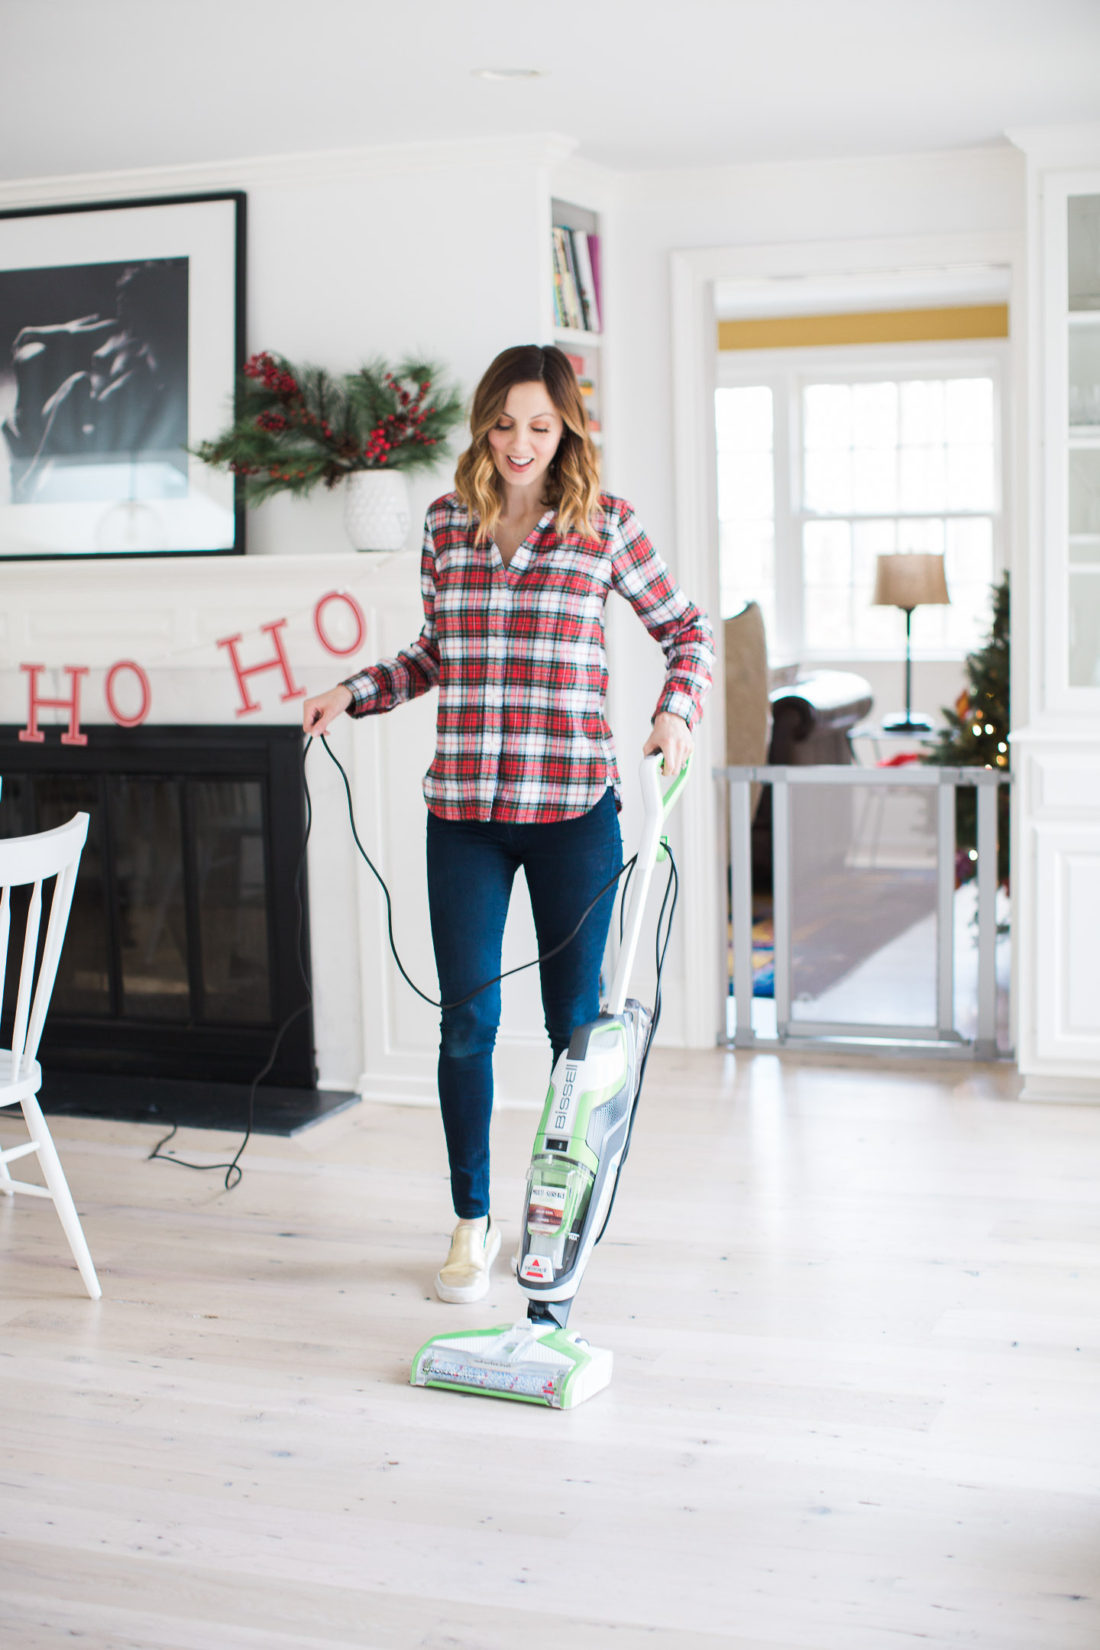 Eva Amurri Martino prepares her home for a holiday party using the bissell crosswave cleaning system